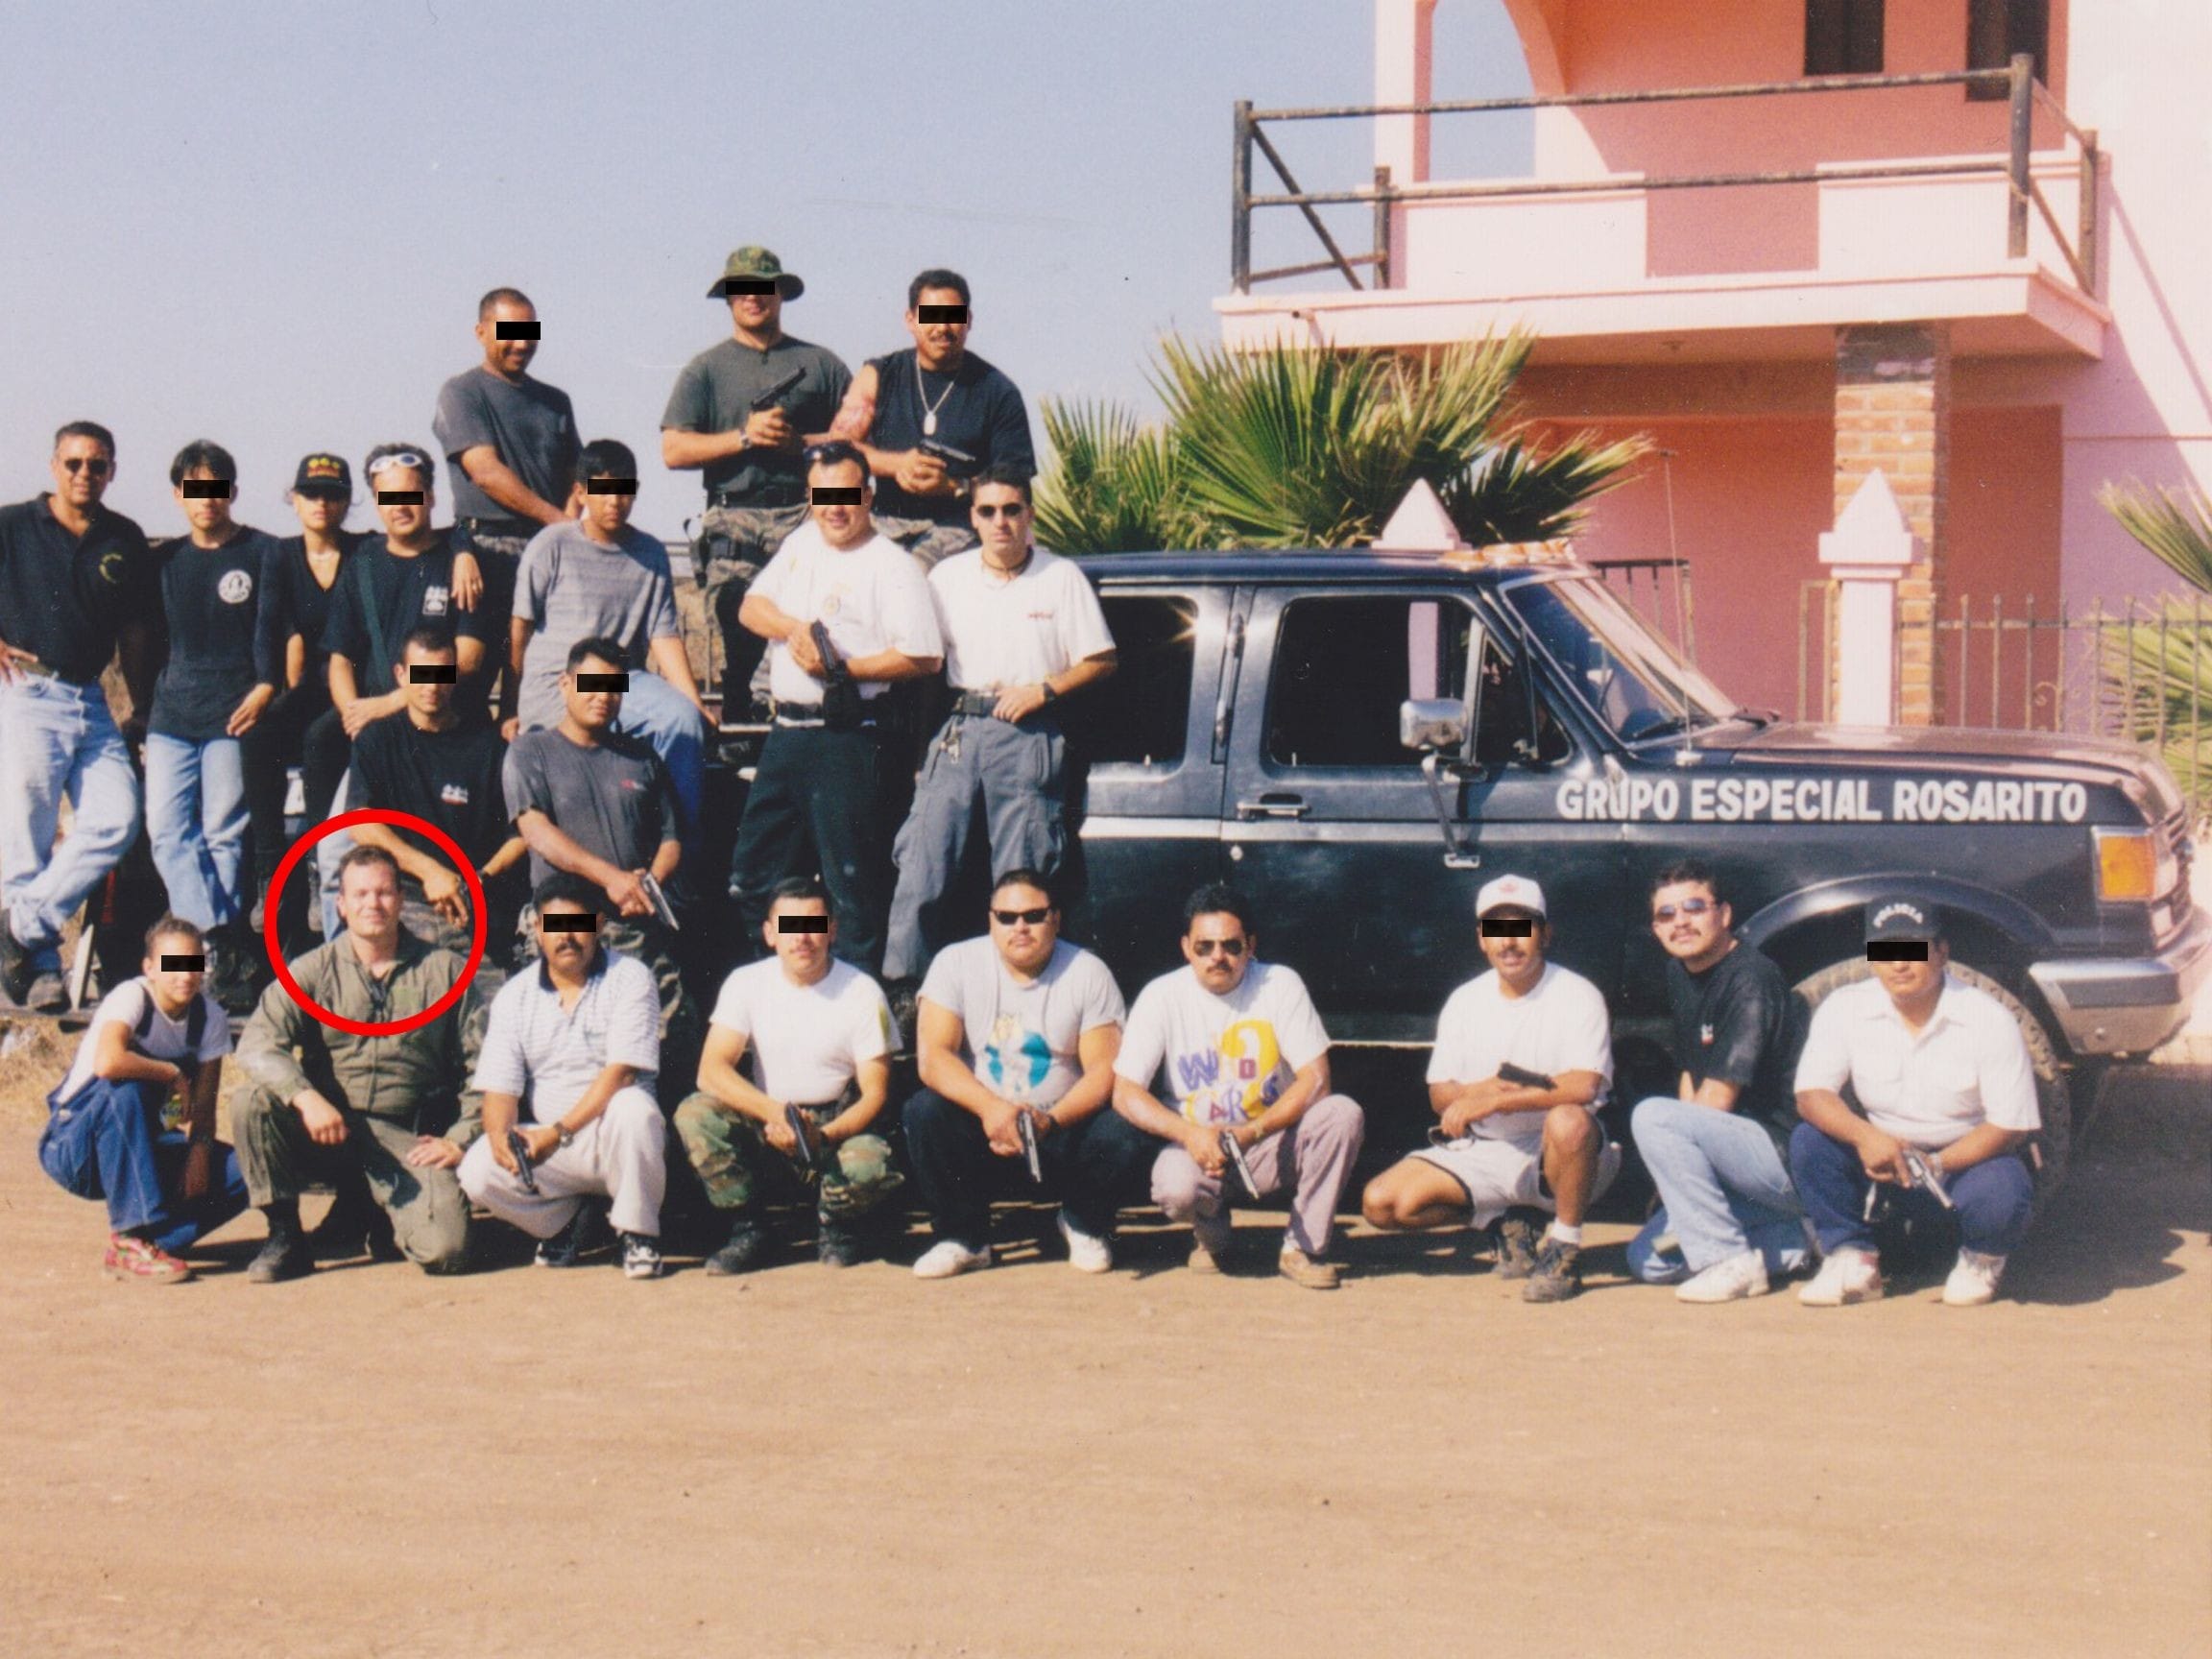 Jim (red circle) trained this SWAT team (Grupo Especial) in Rosarito, Mexico. A couple of the students had been to one of Jim's courses in California before.